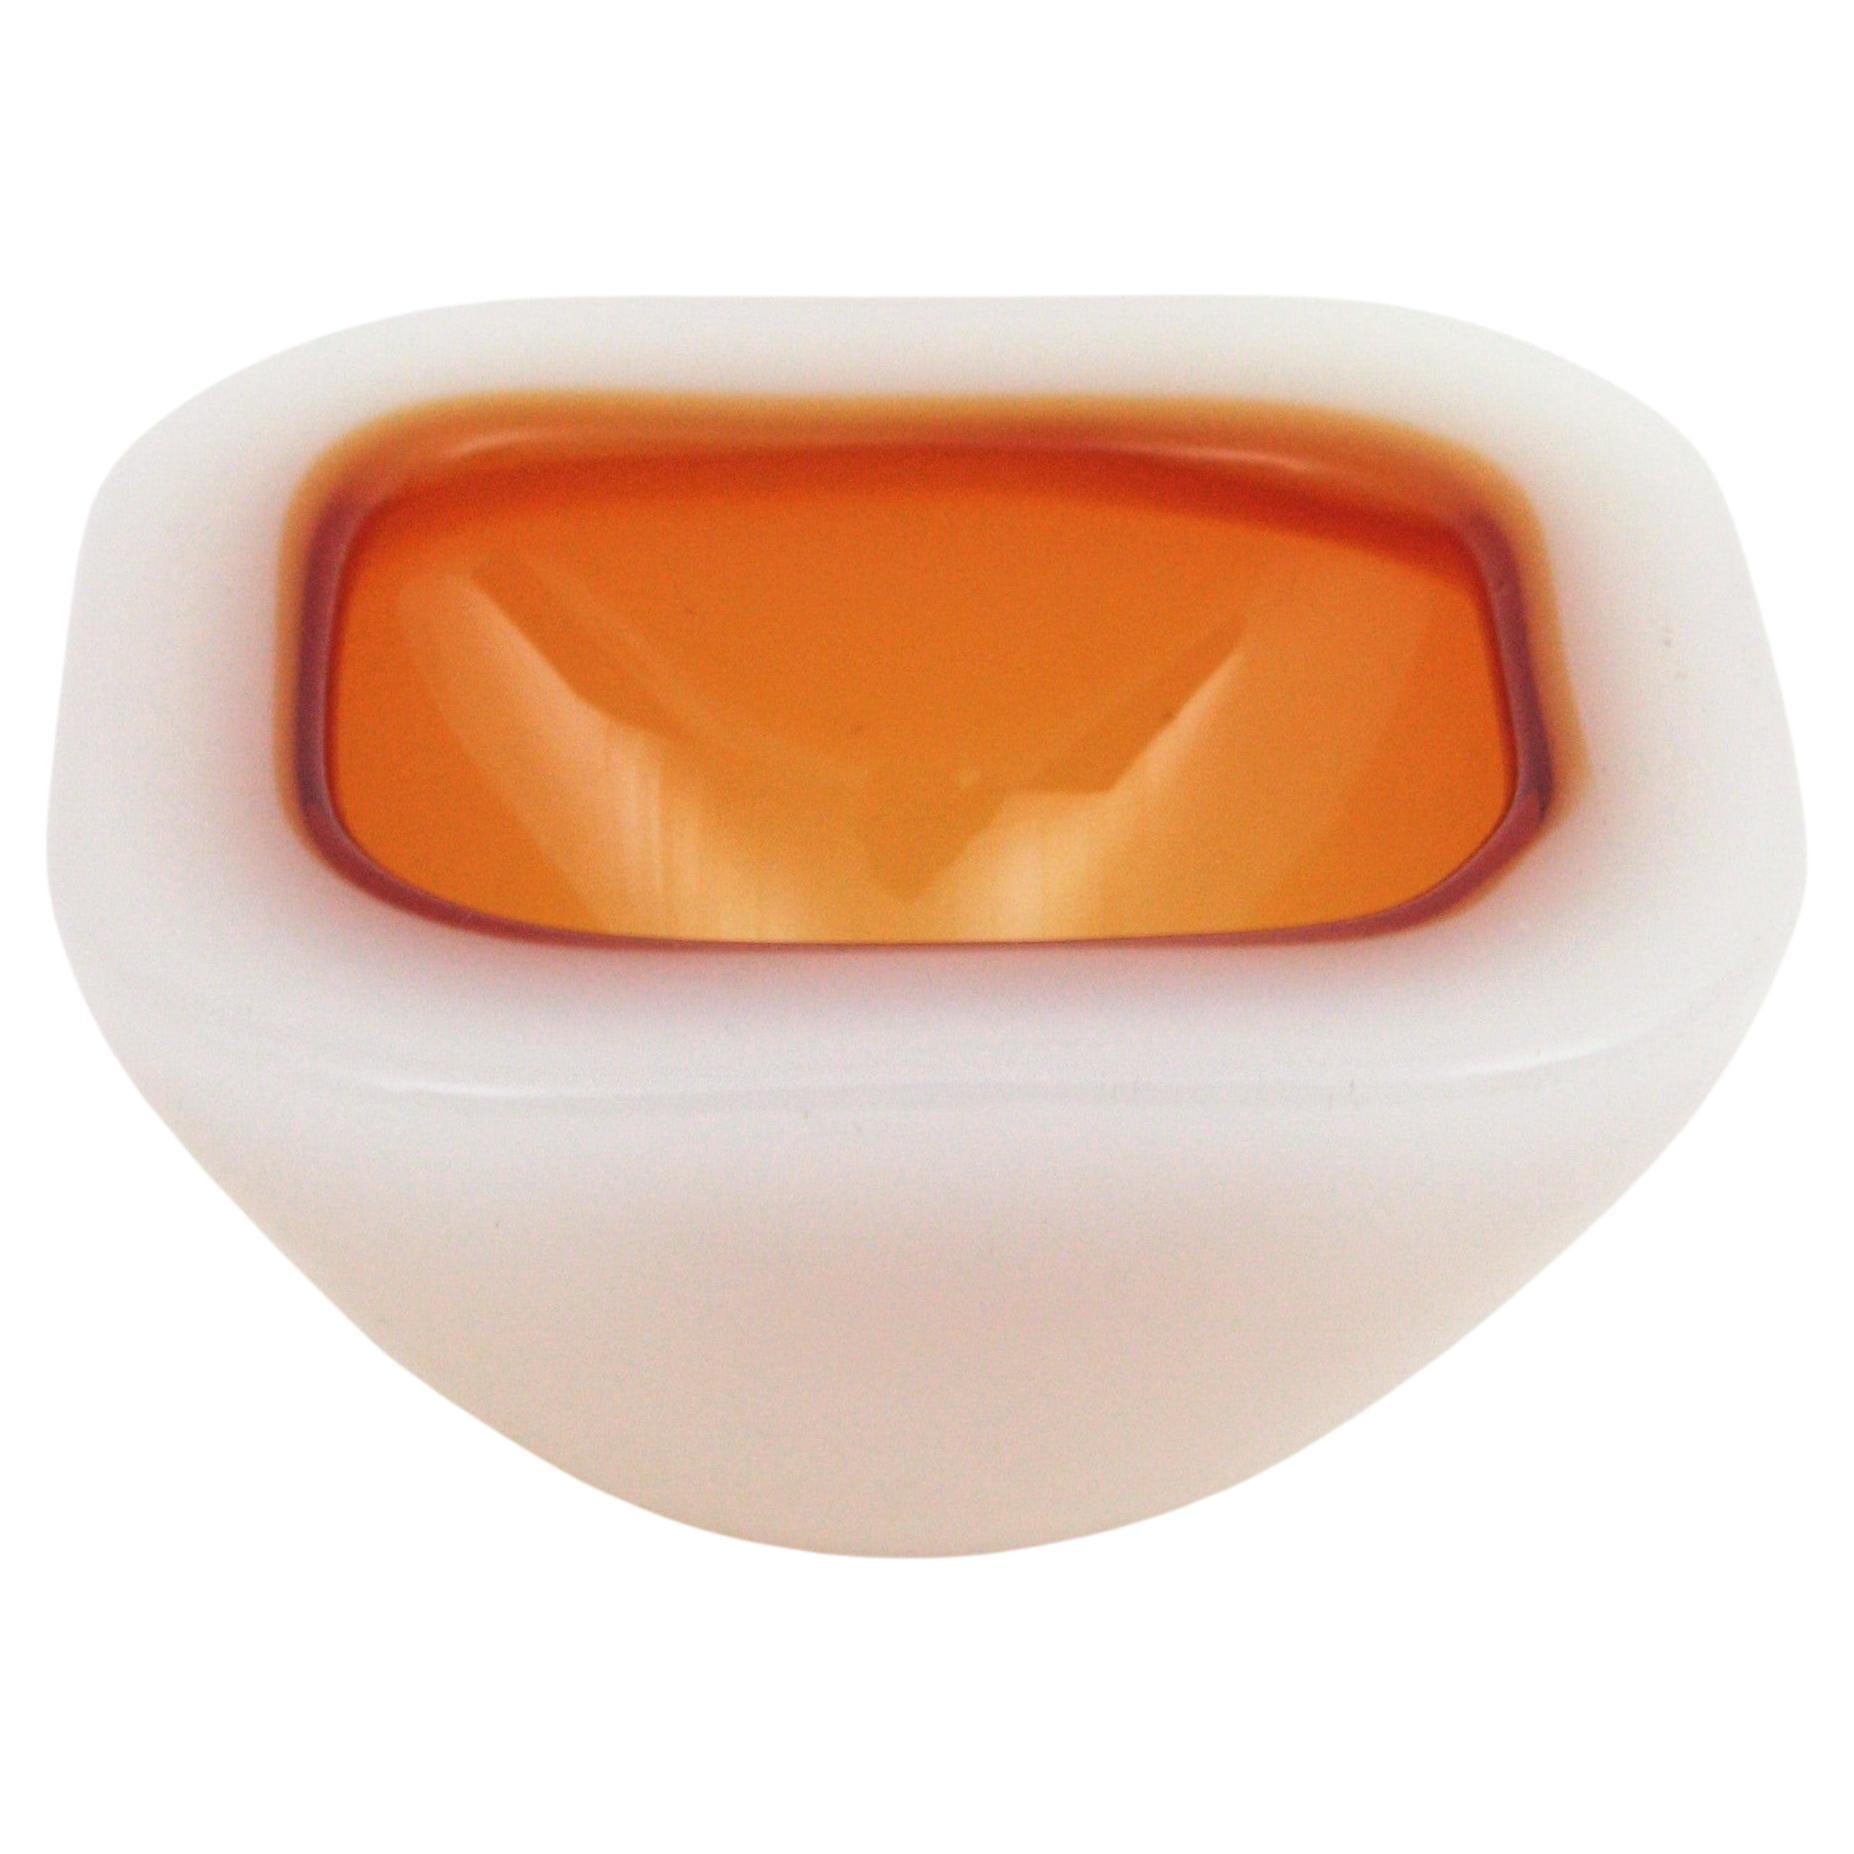 Hand blown Murano glass Sommerso geode bowl in amber and white color attributed to Archimede Seguso, Italy, 1950s.
This alabastro bowl has an eye-catching interior part in orange / amber glass. Lovely to be used as jewelry bowl, rings bowl, ashtray